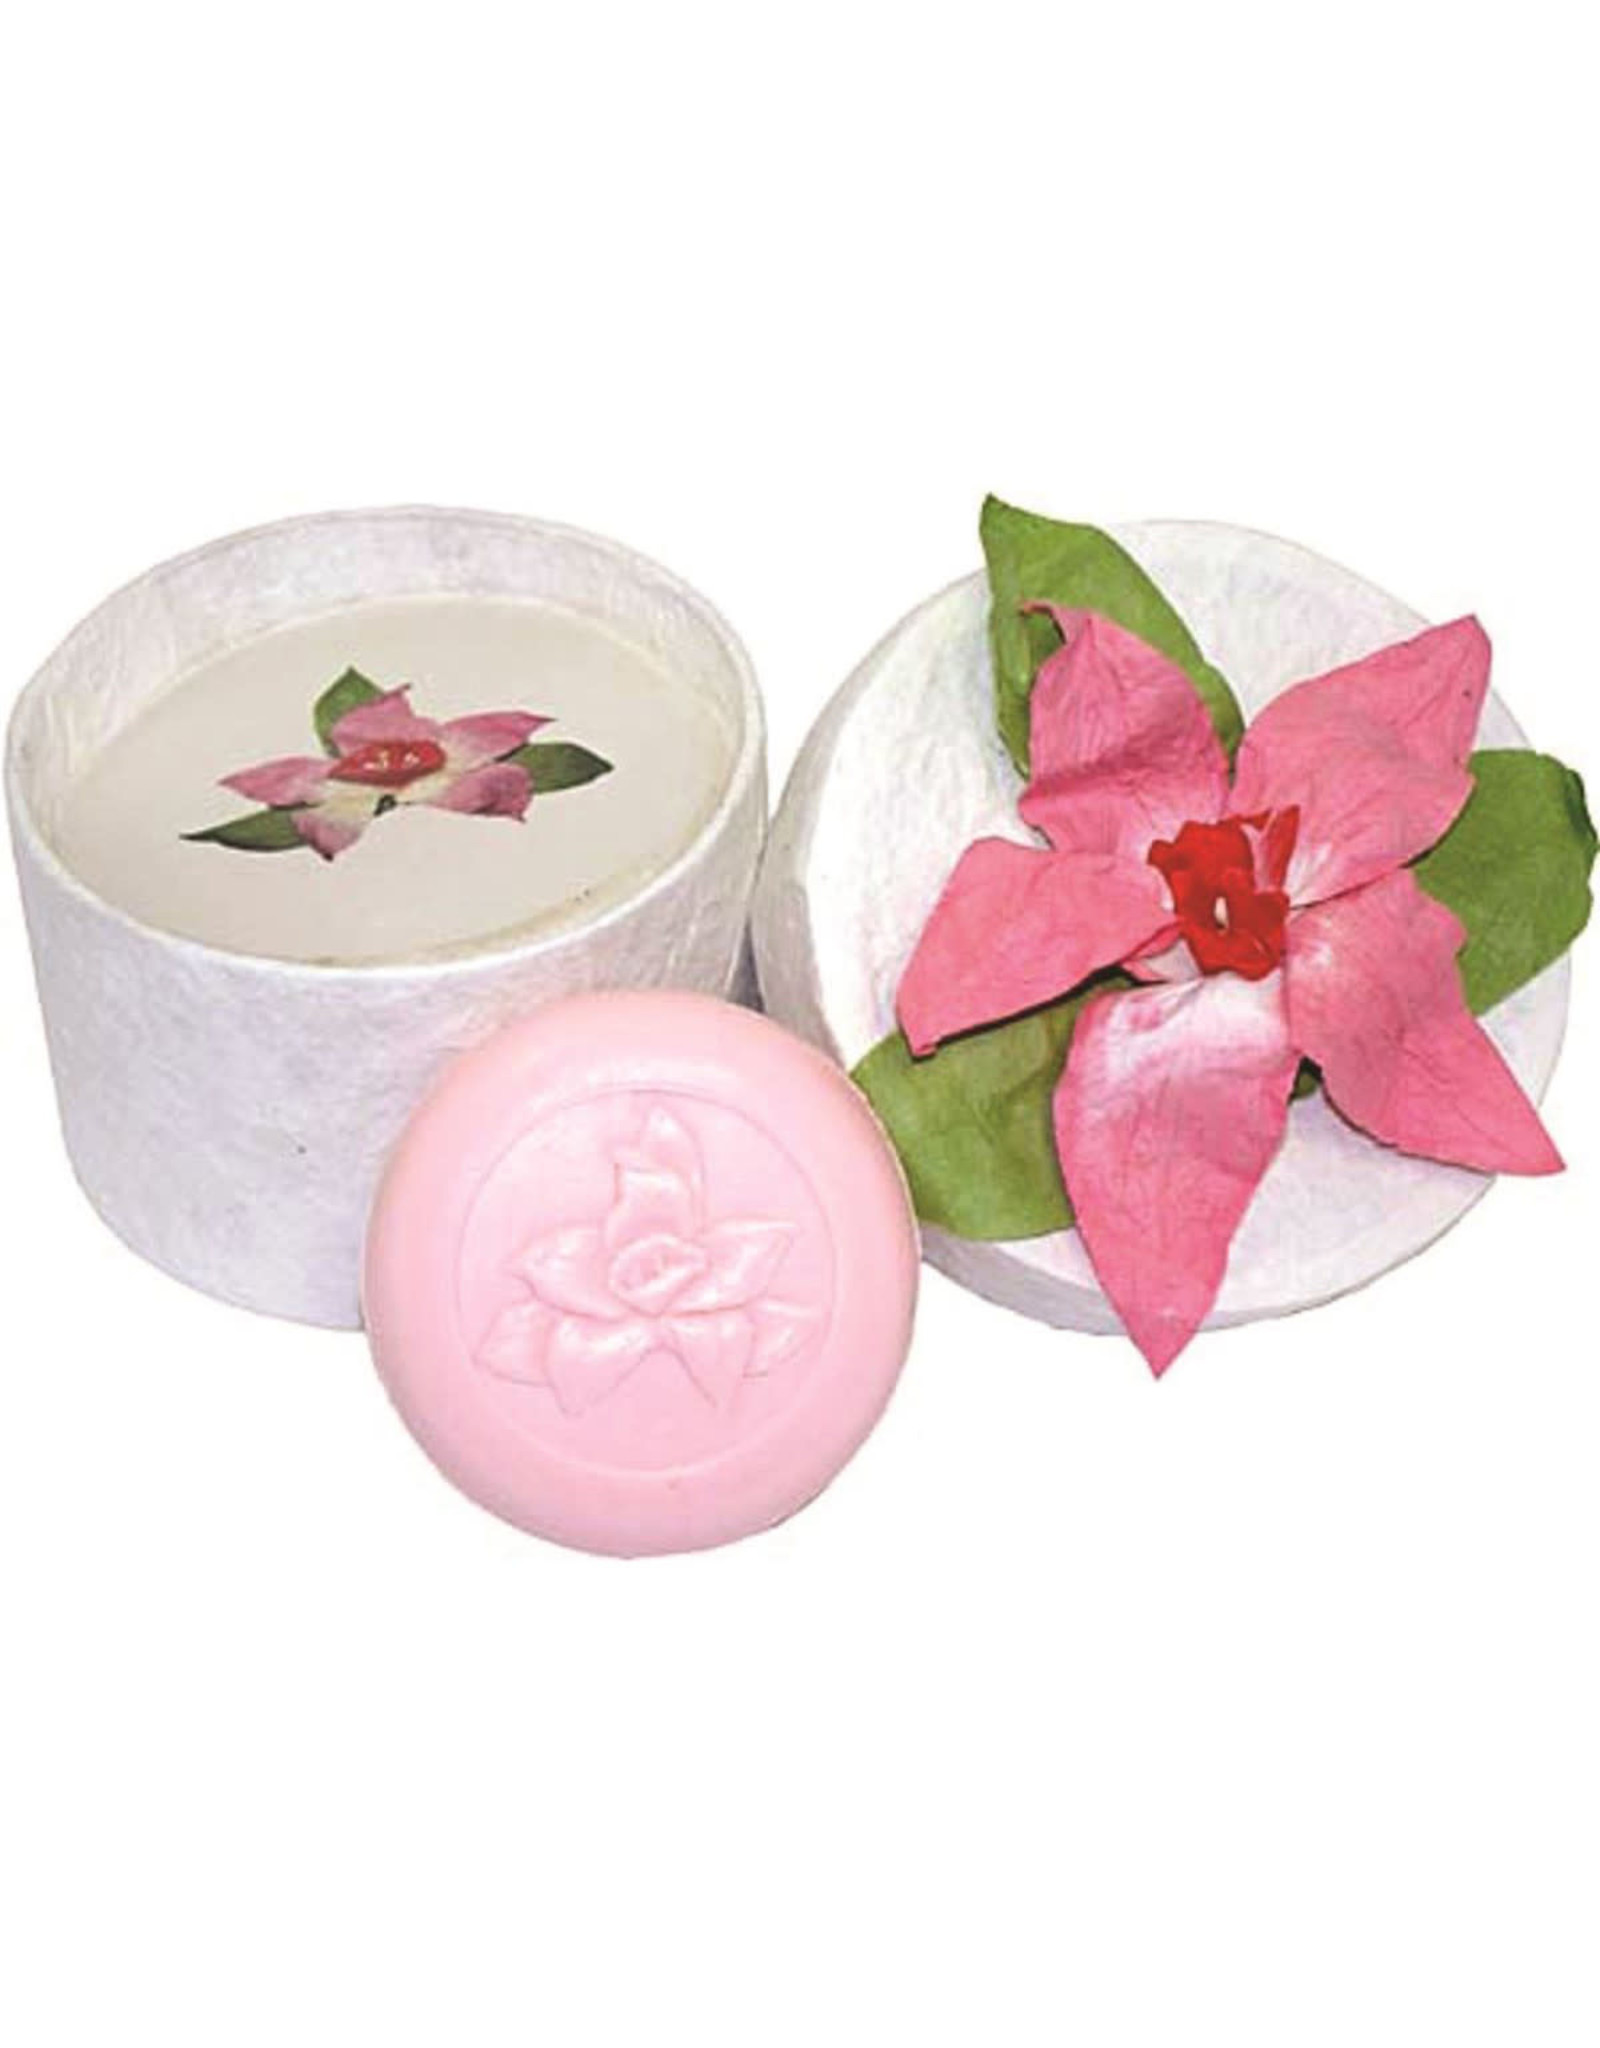 Clover Fields Hibiscus Pamper Pack - Bath Salts and Soap